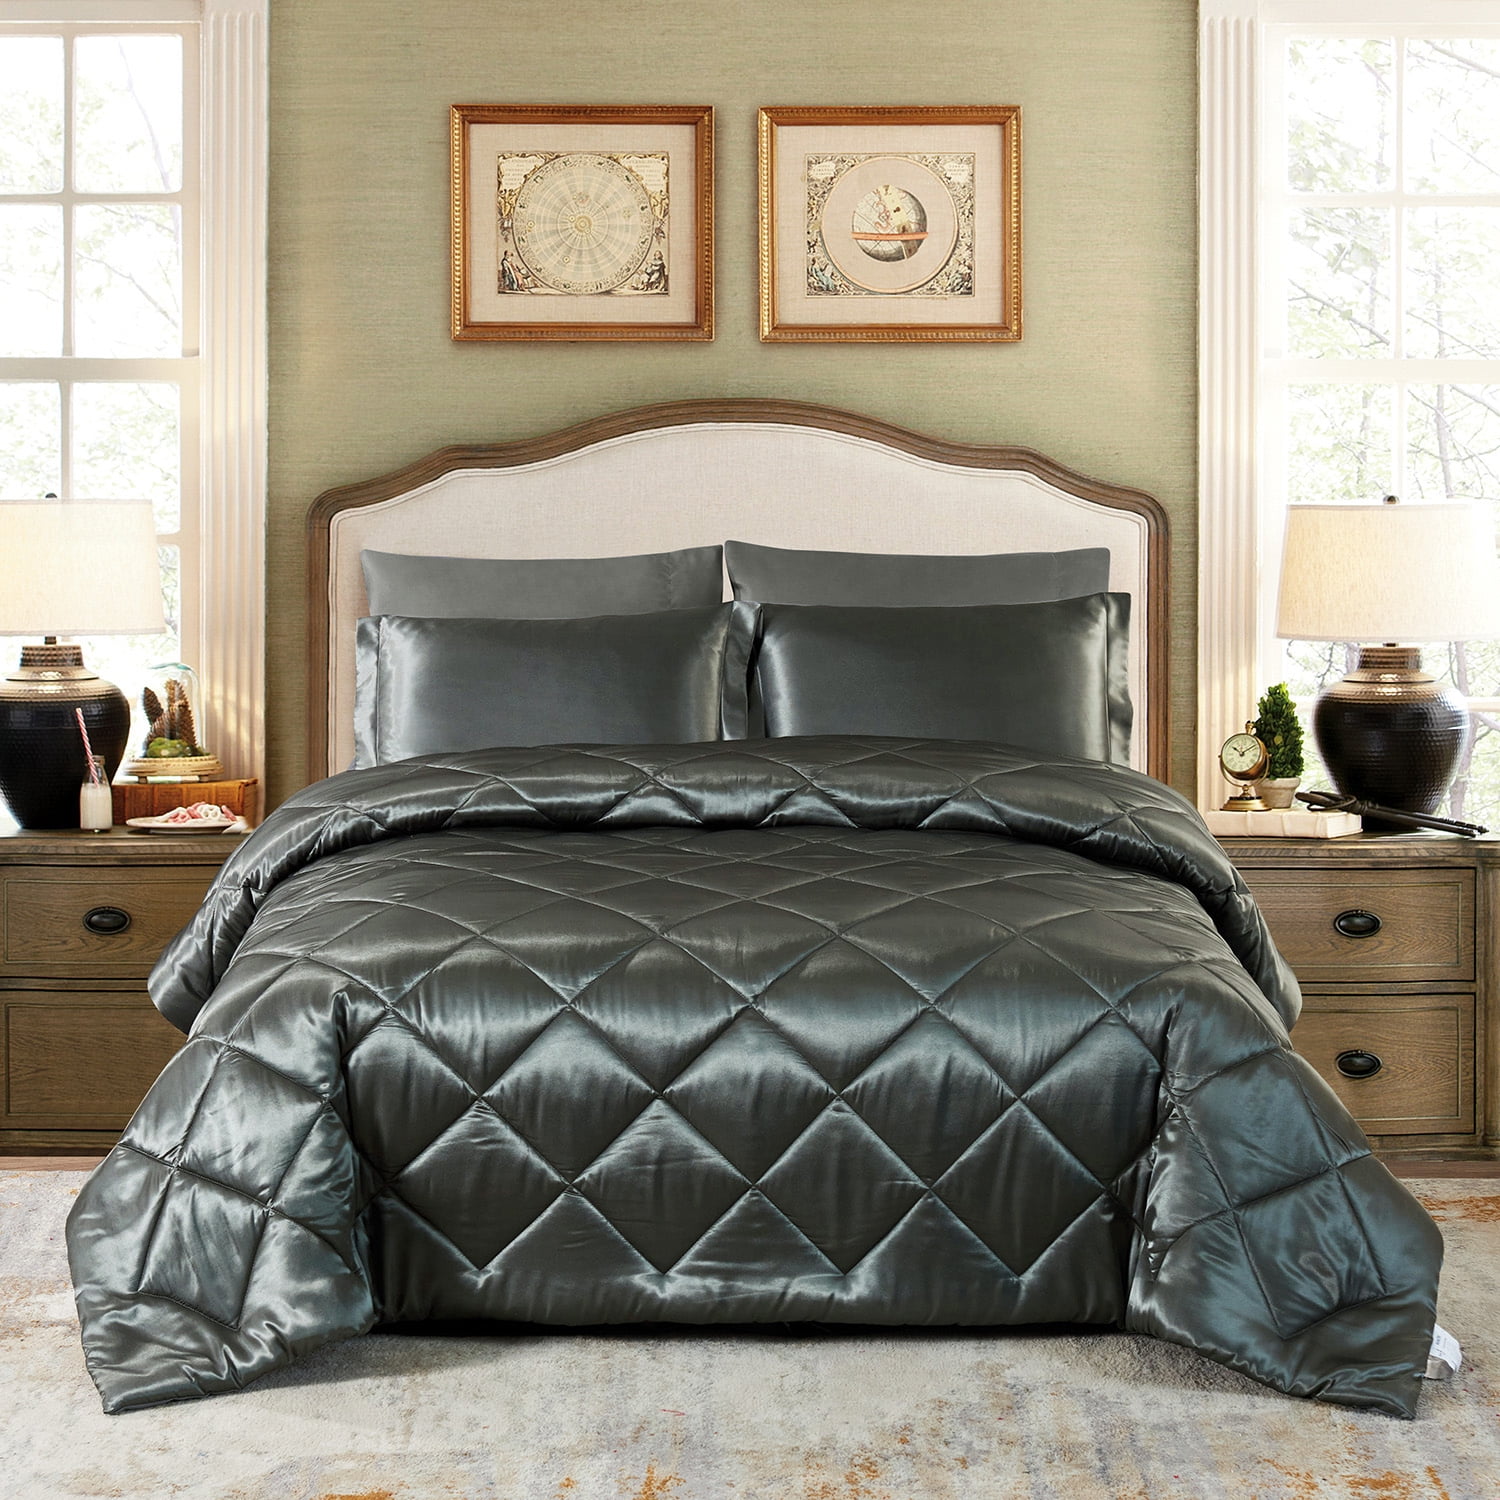 Bedding Sets Queen Clearance Best Comforter Luxury Silky Satin Quilted Gray 3 